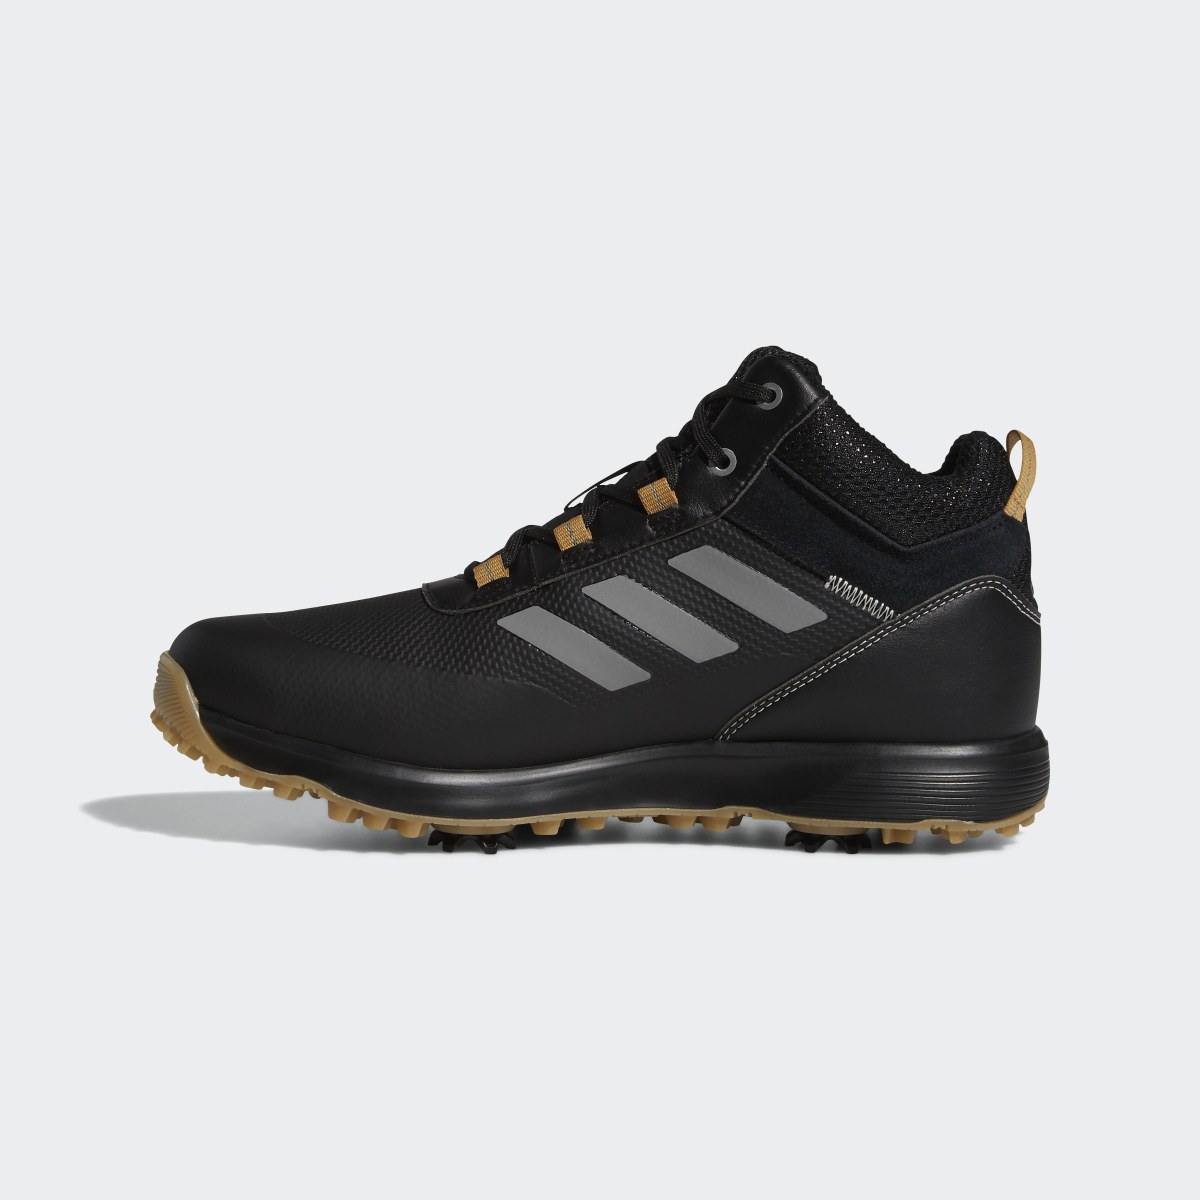 Adidas S2G Recycled Polyester Mid-Cut Golf Shoes. 9